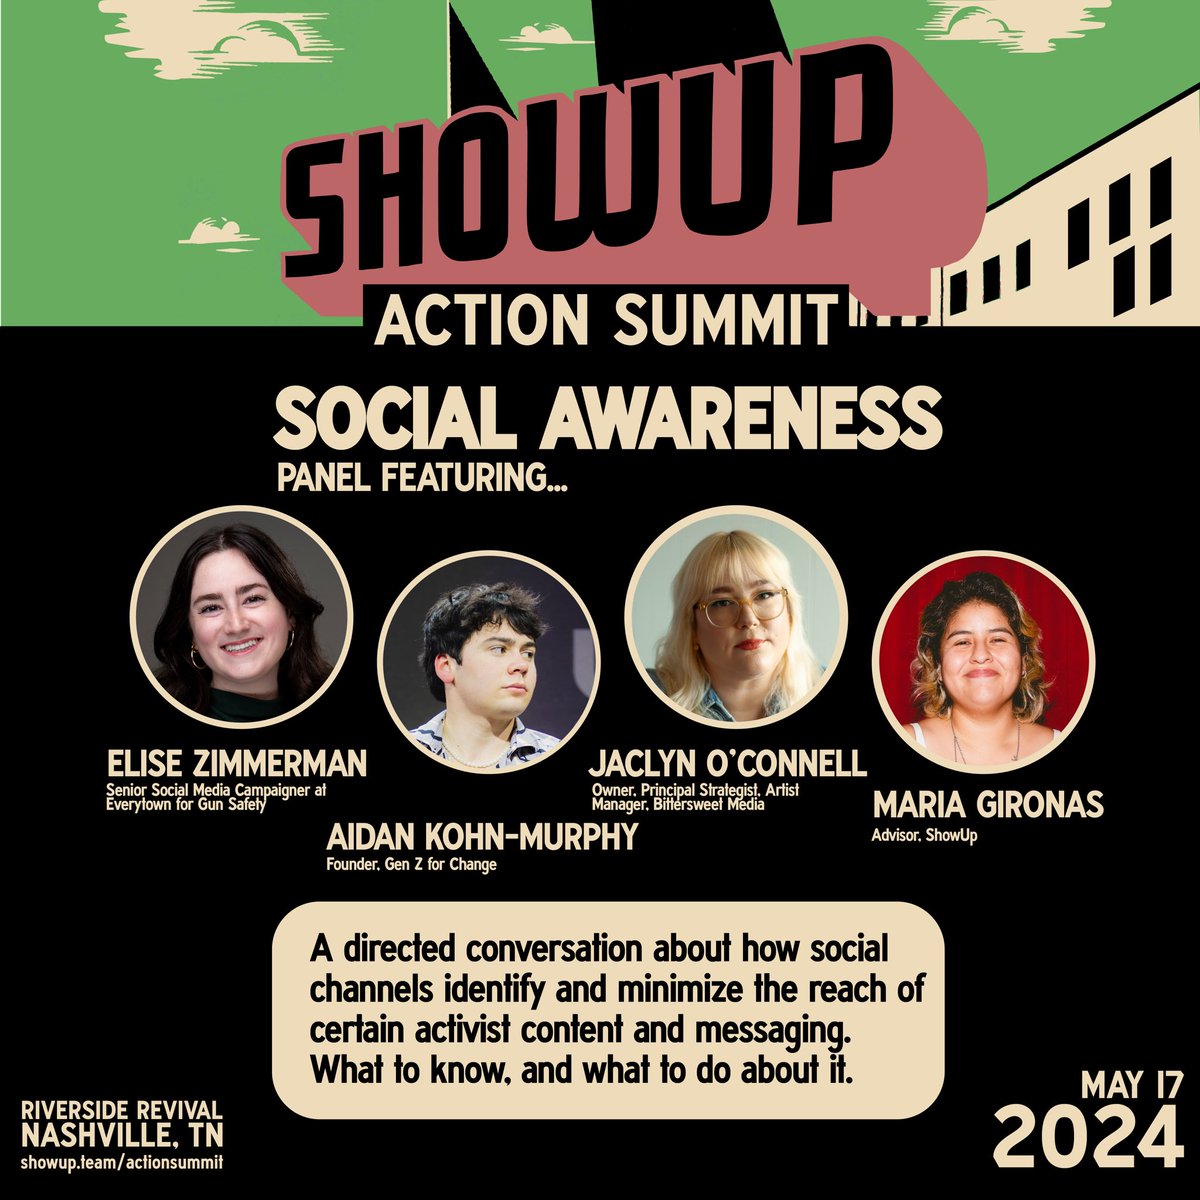 Hello Nashville 👋 This Friday, May 17, ShowUp is hosting its first #ShowUpActionSummit at Riverside Revival in Nashville, TN.